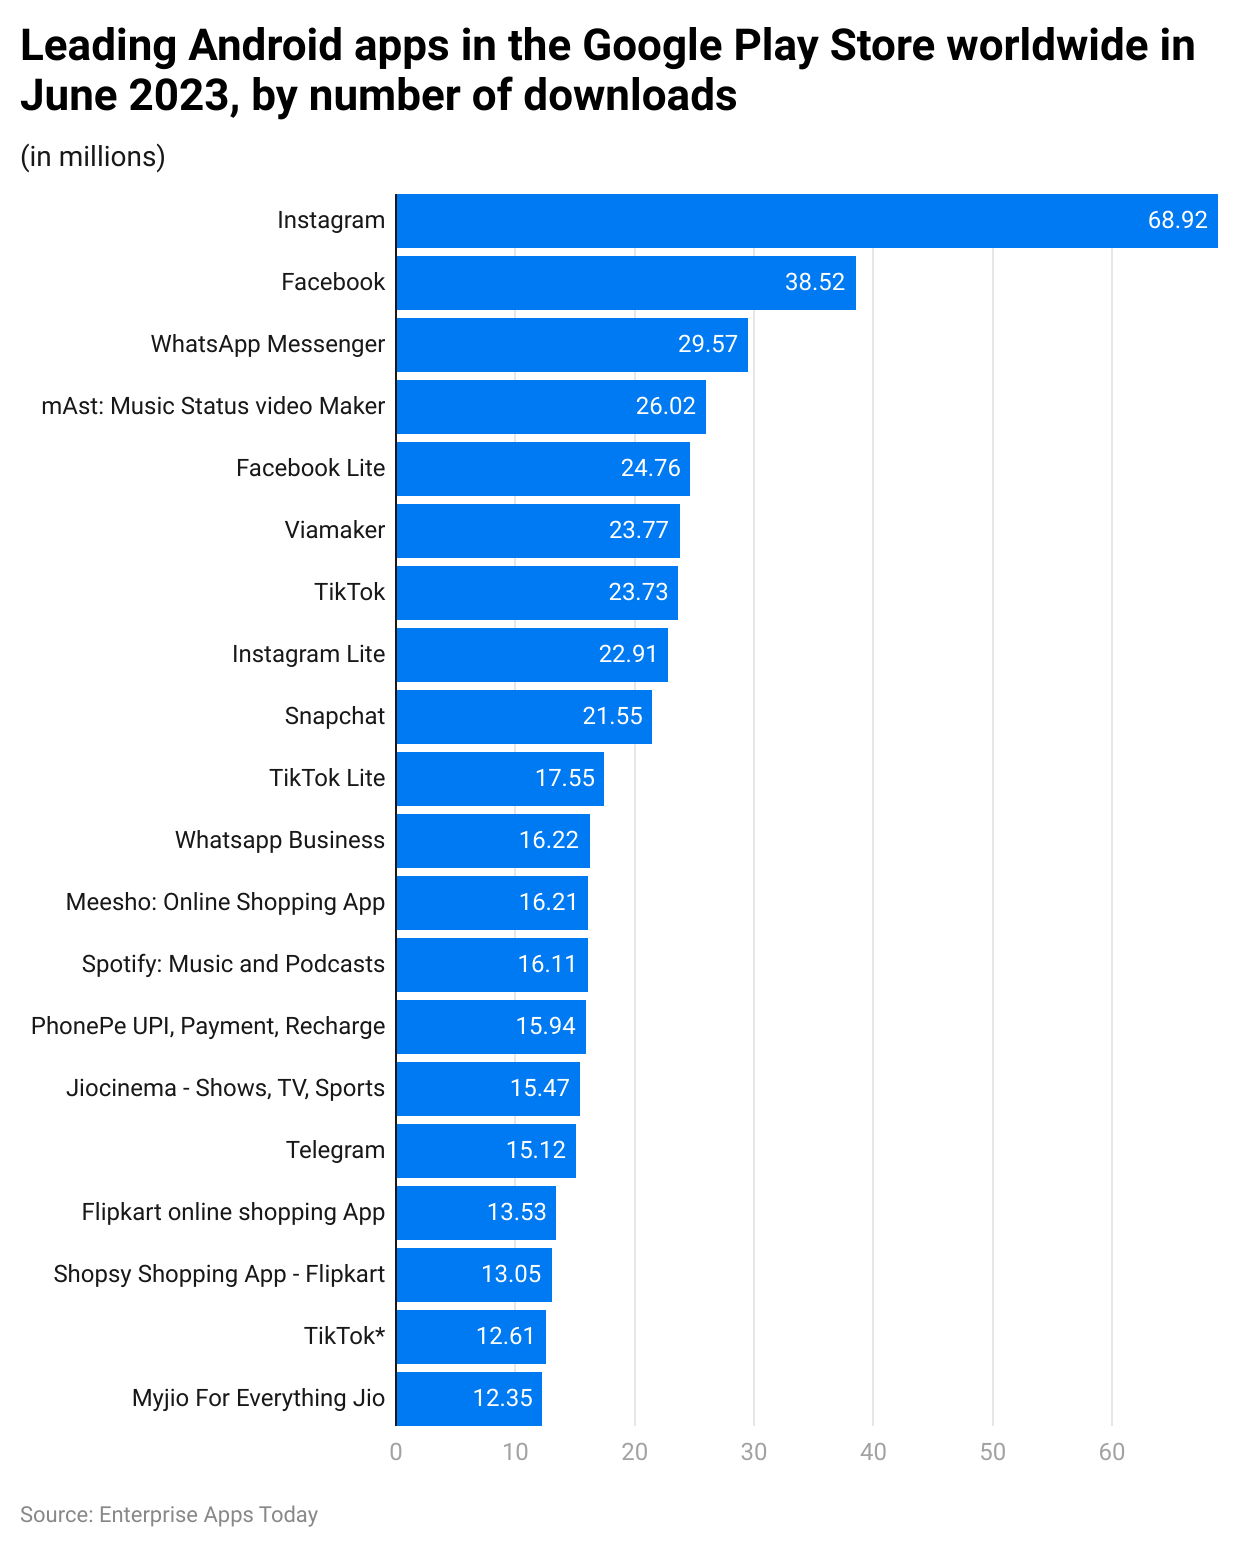 leading-android-apps-in-the-google-play-store-worldwide-in-june-2023-by-number-of-downloads